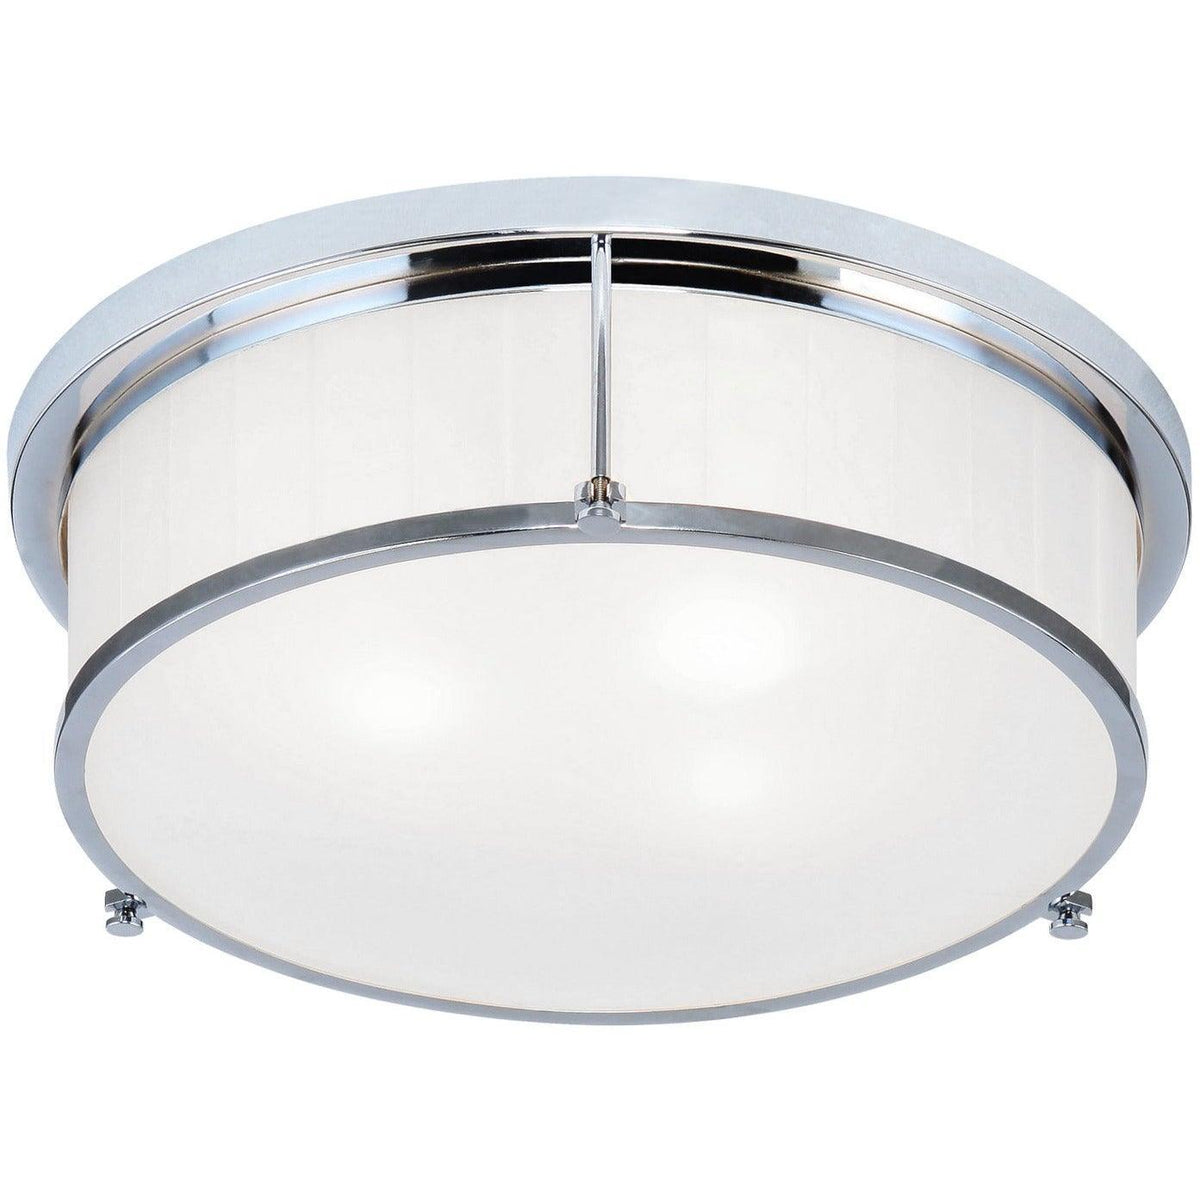 Matteo Lighting - Caisse Claire Flush Mount - M14903CH | Montreal Lighting & Hardware